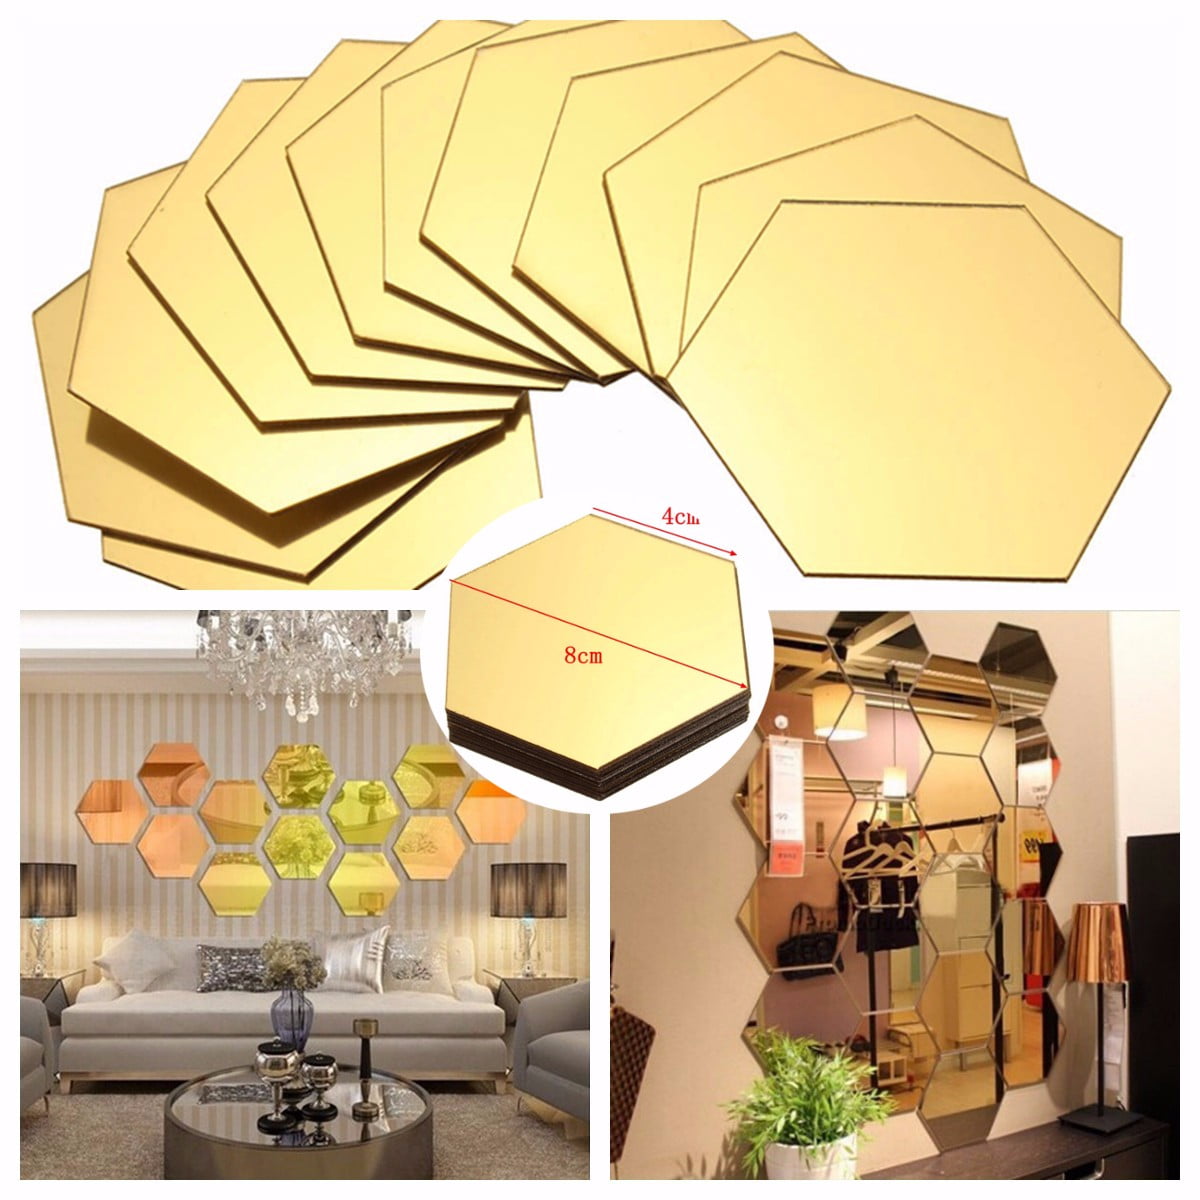 Large Hexagon Mirror Tiles Glass Wall Stickers Self Adhesive Stick On Art 24 